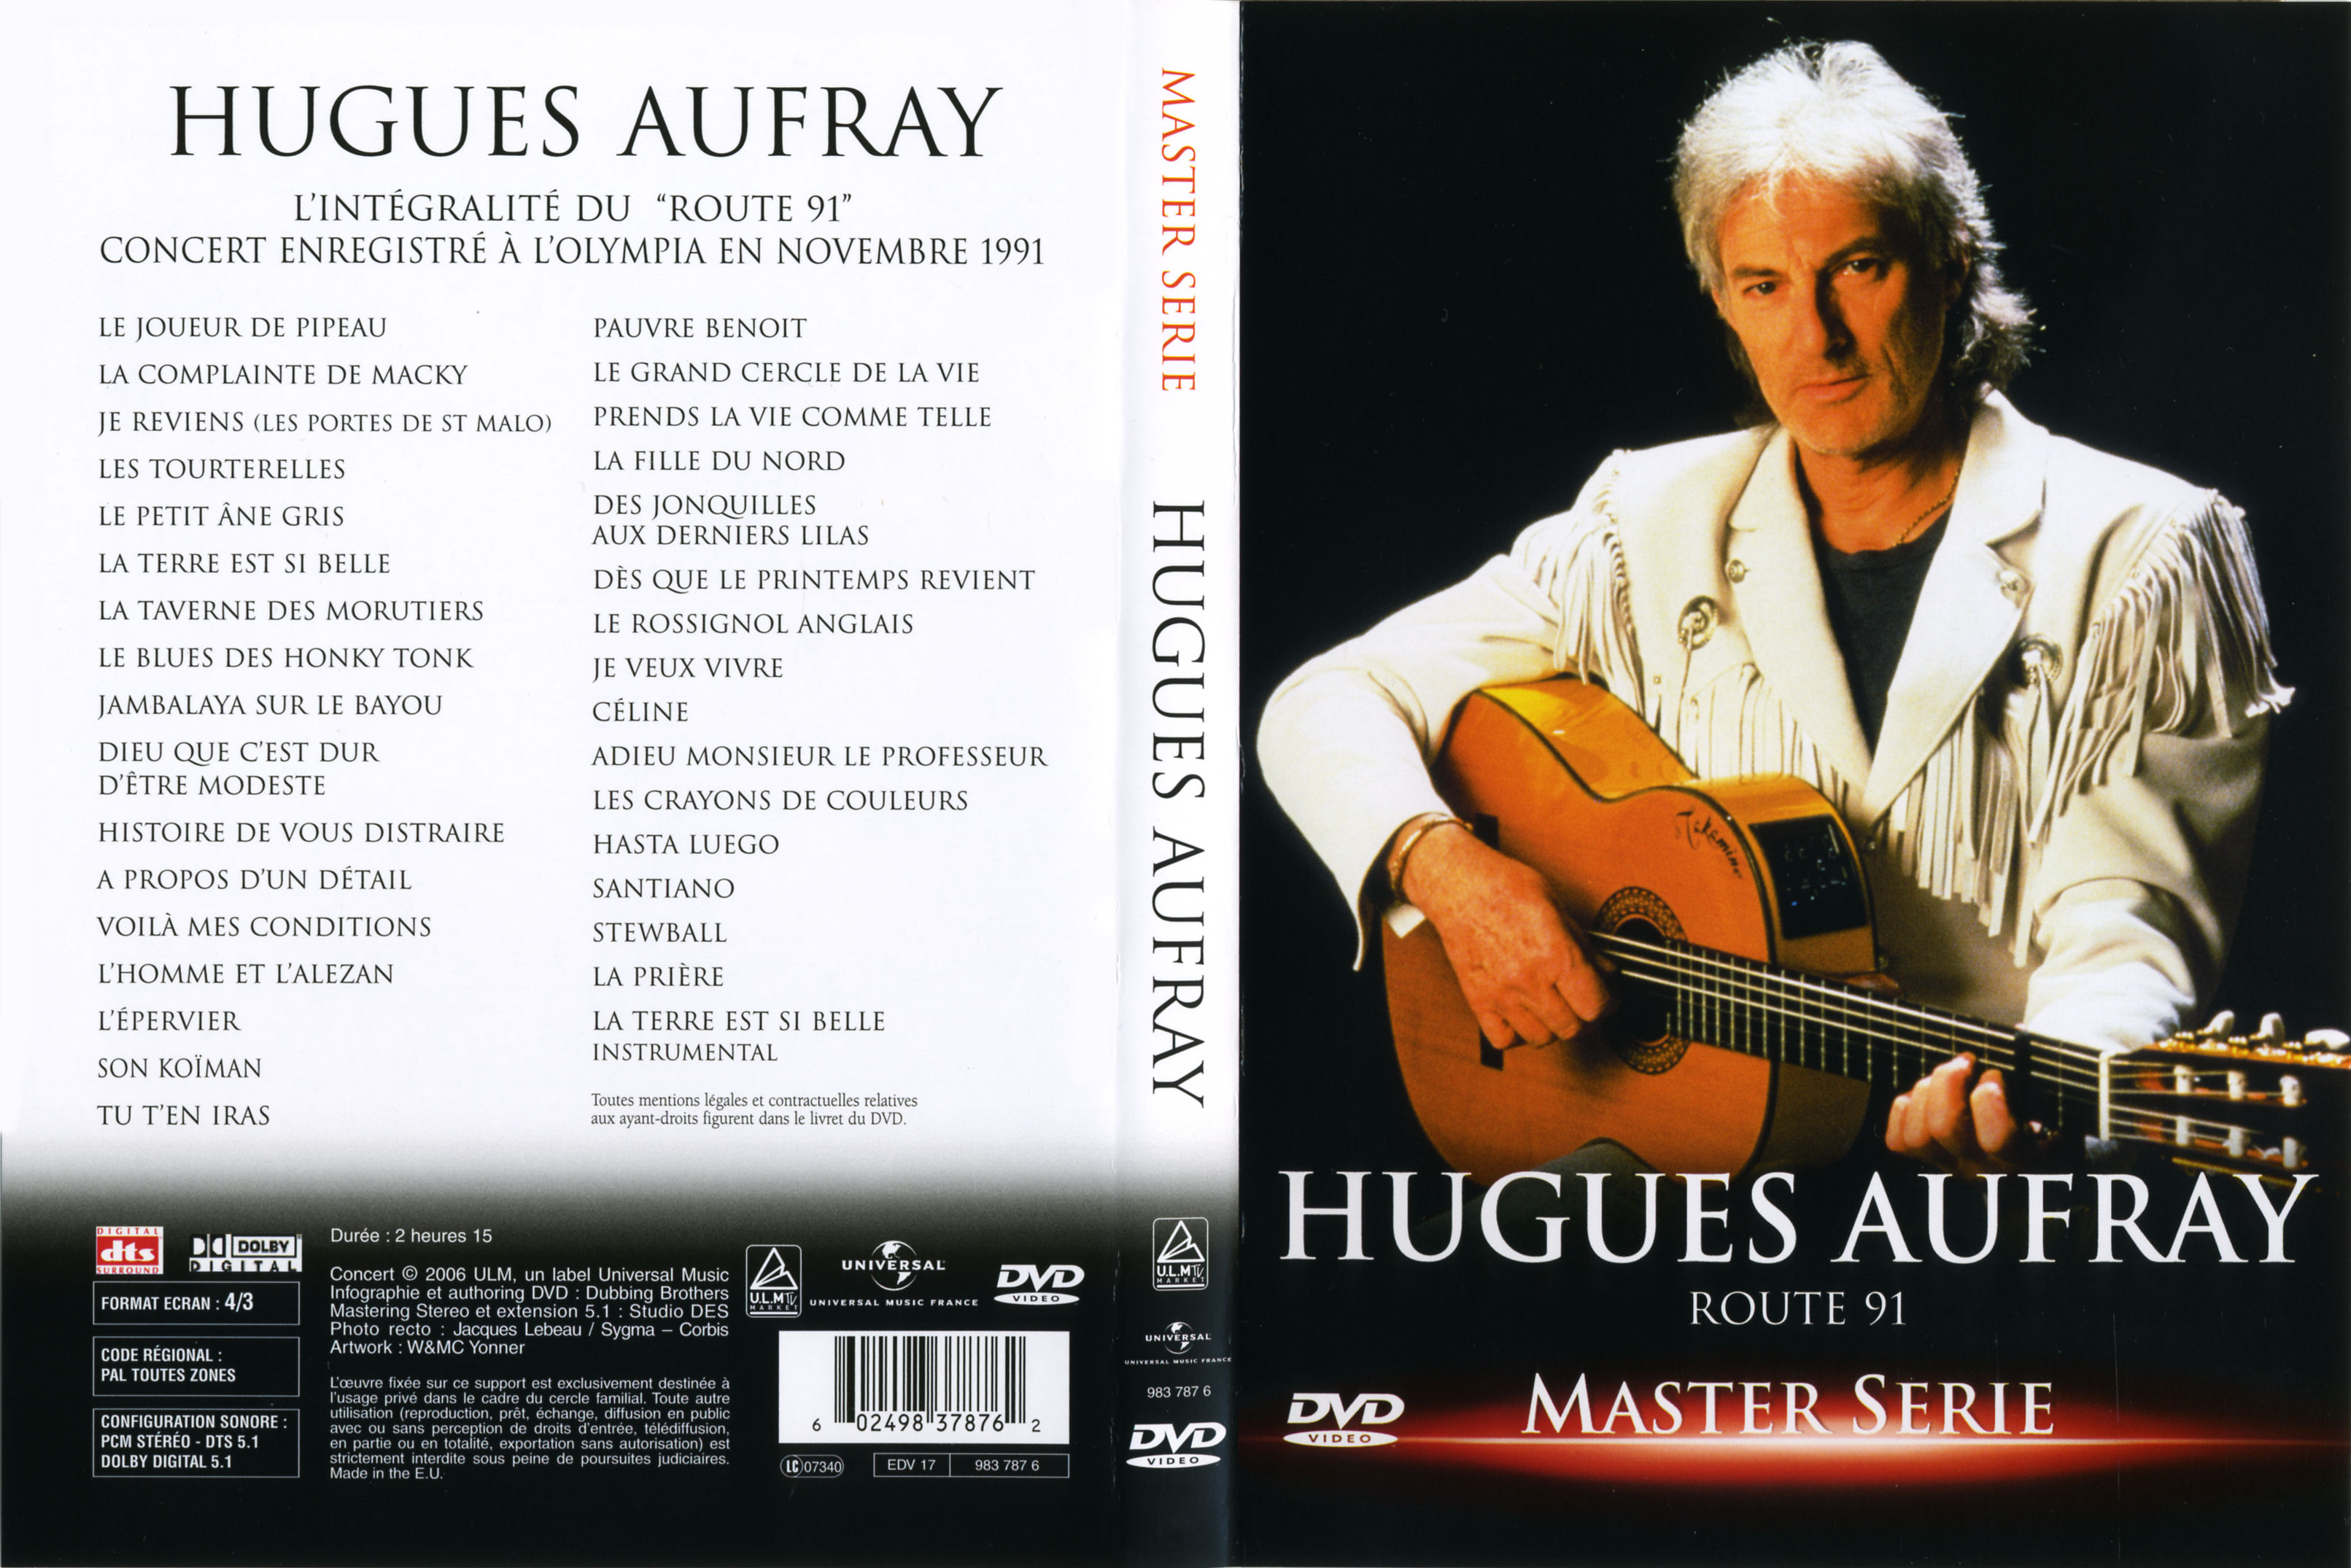 Jaquette DVD Hugues Aufray - Route 91